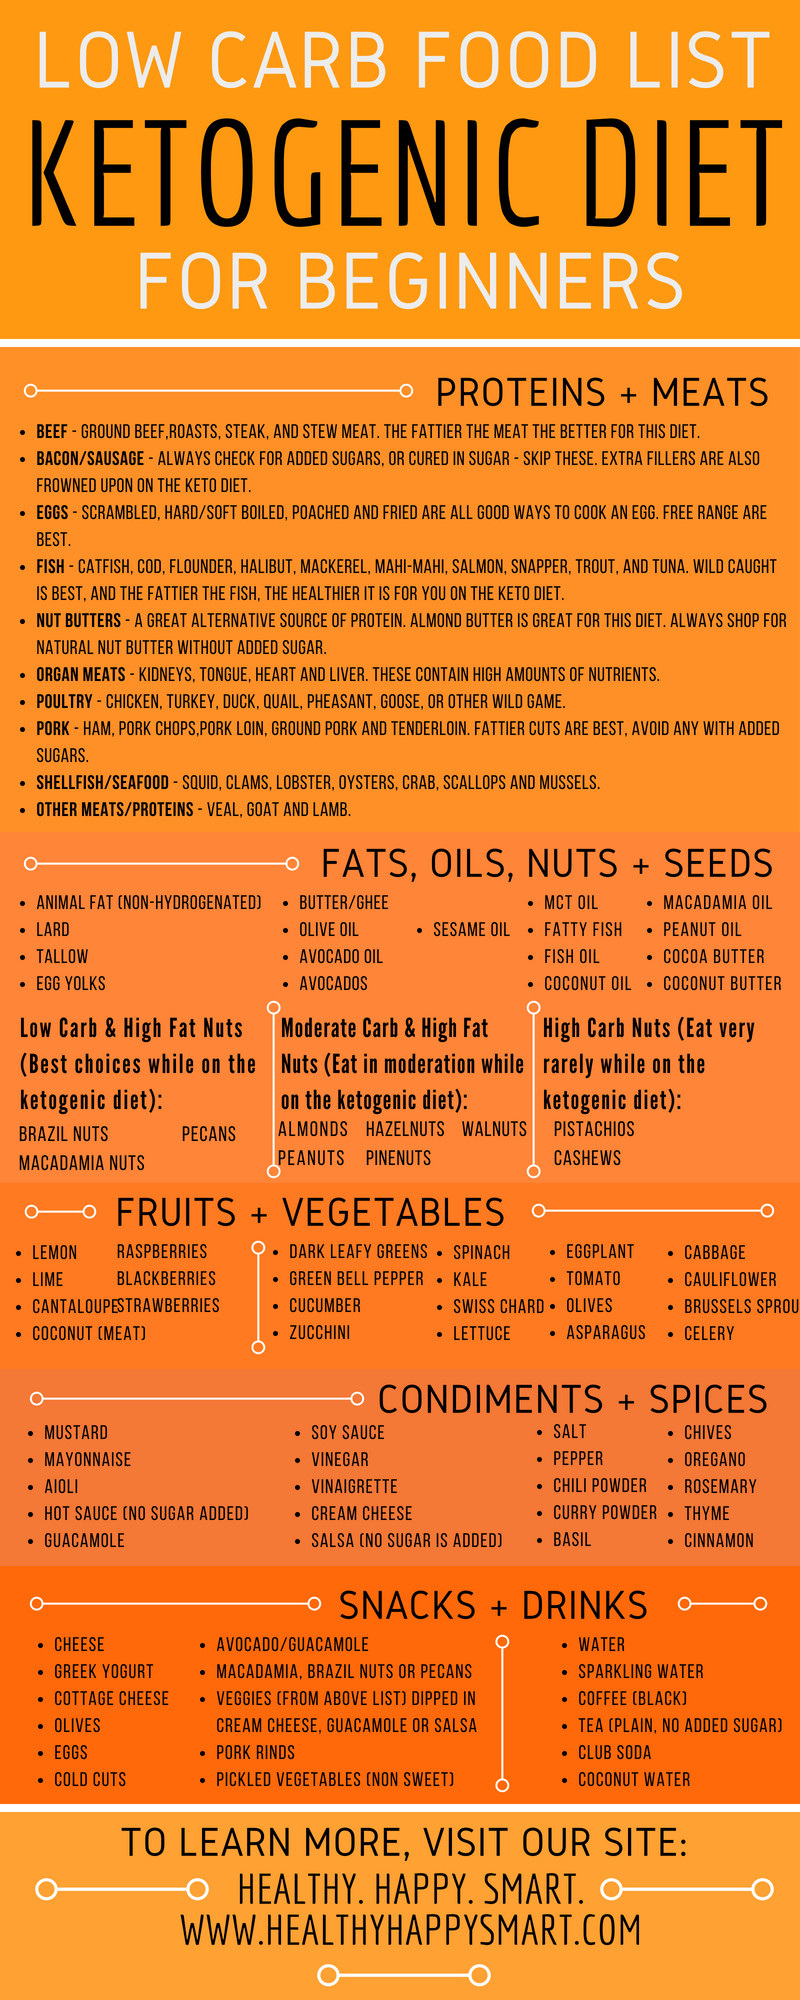 Foods On The Keto Diet
 Keto Diet Food List Guide What to Eat or Not Eat